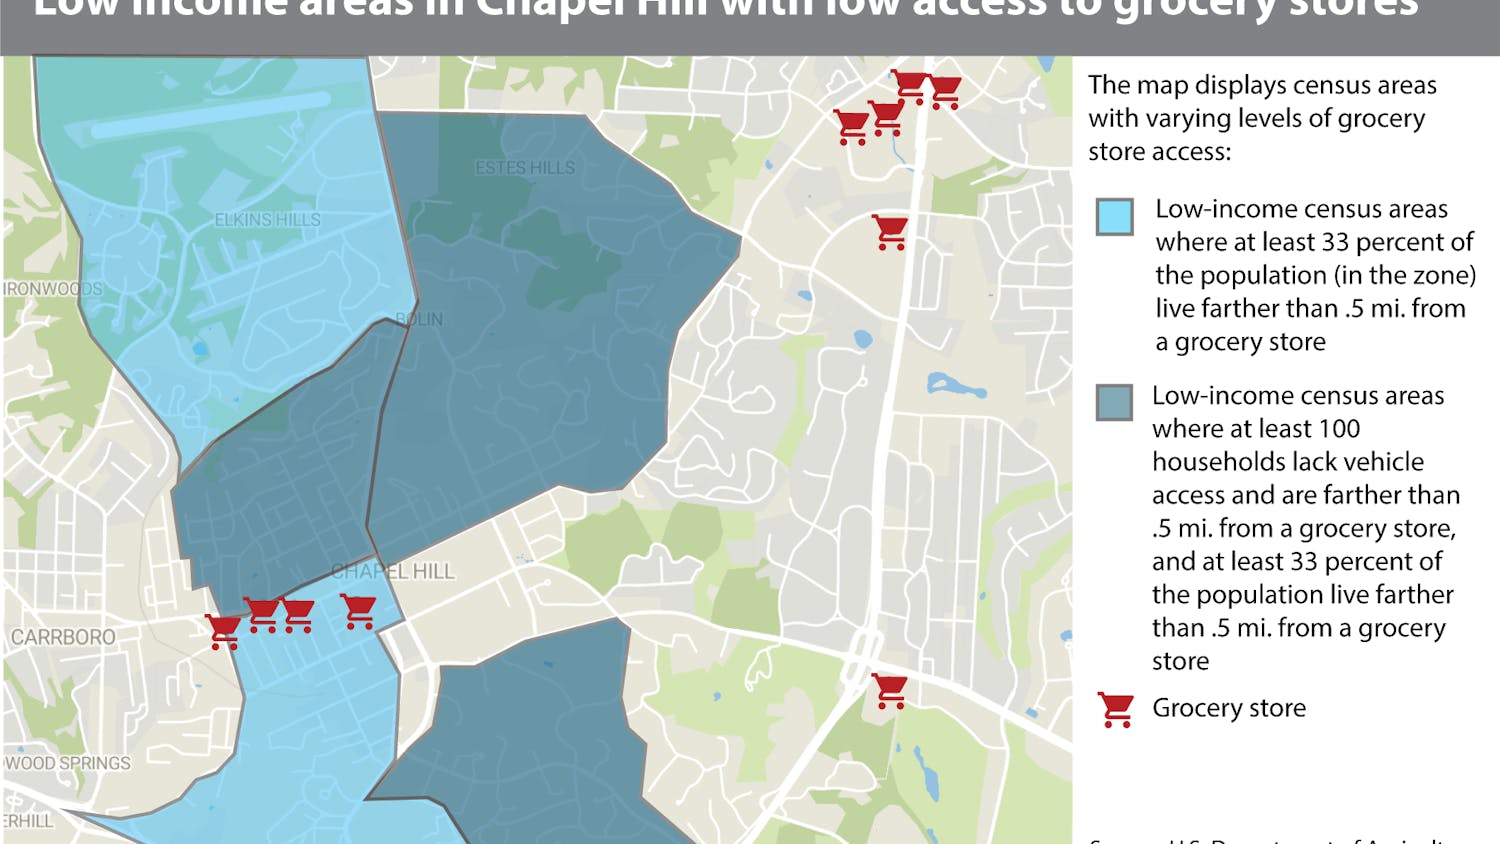 Low income areas in Chapel Hill with low access to grocery stores